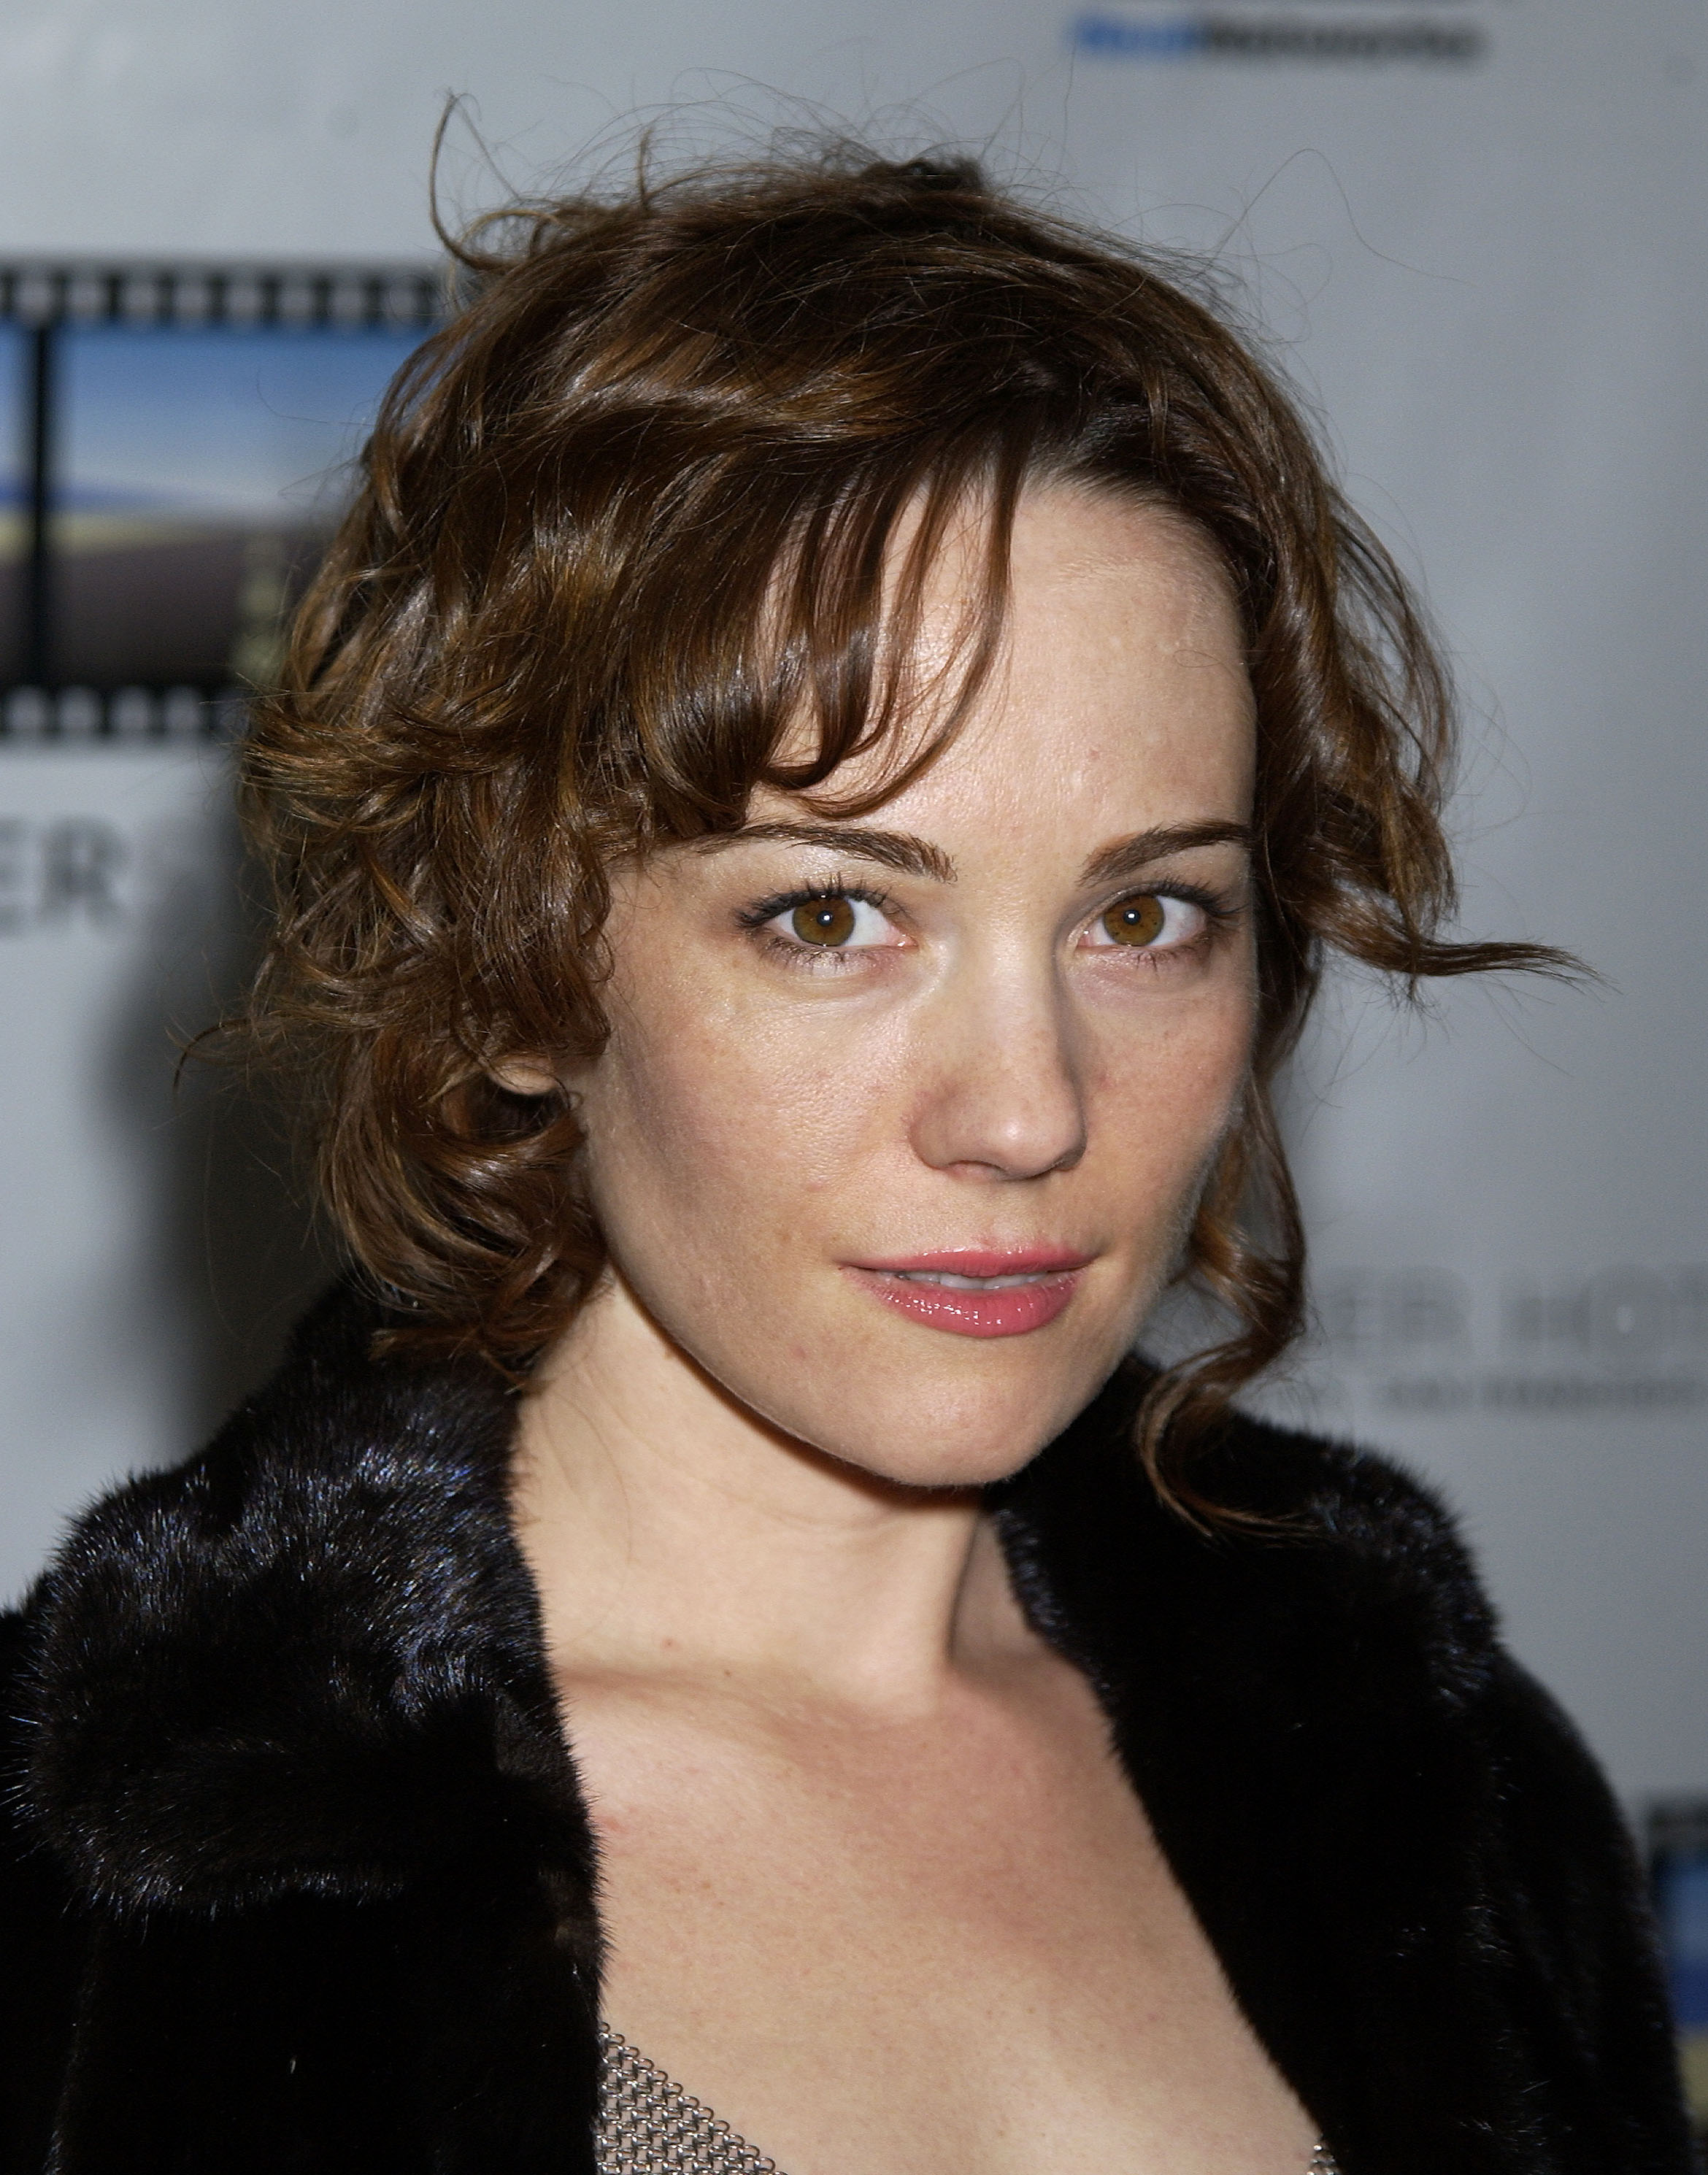 Natasha Gregson Wagner during Kevin Spacey's TriggerStreet.com Launches New Content Showcase at Las Vegas Convention Center on November 18, 2002 in Las Vegas, Nevada. | Source: Getty Images